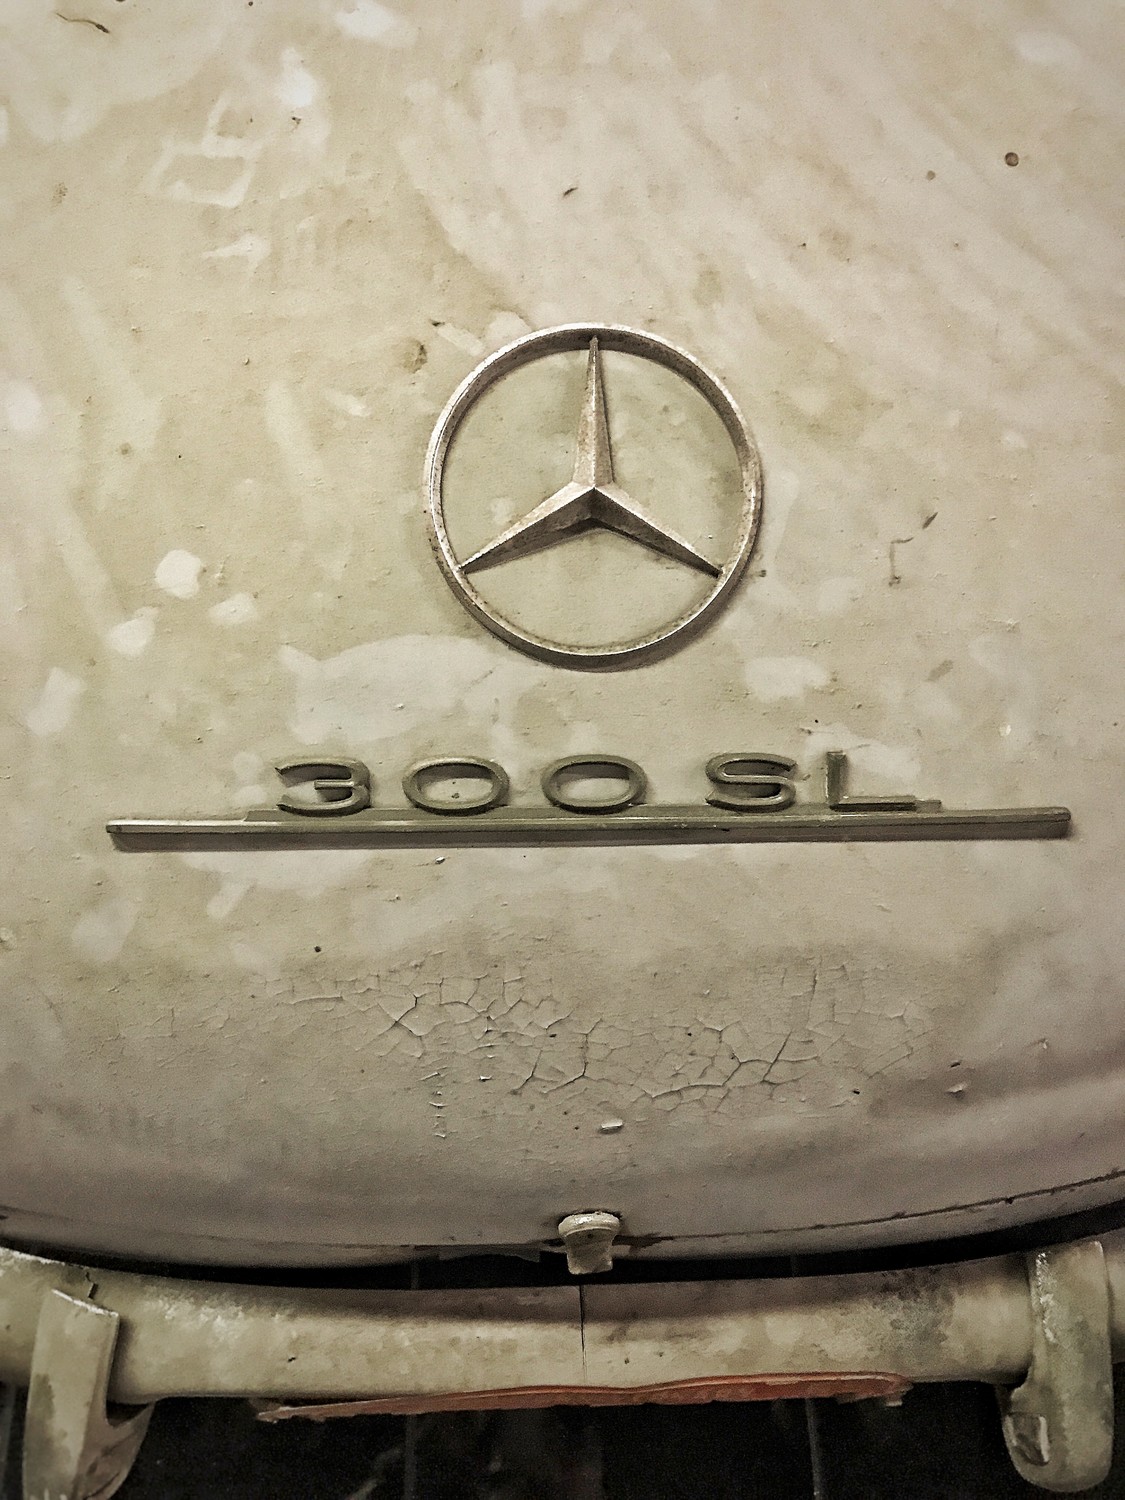 The 1954 Mercedes-Benz 300SL Gullwing Coupe is displayed as it was discovered in the Ponte Vedra storage unit. The Gullwing will be shown at the Amelia Island Concours d’ Elegance, which takes place March 7-10.